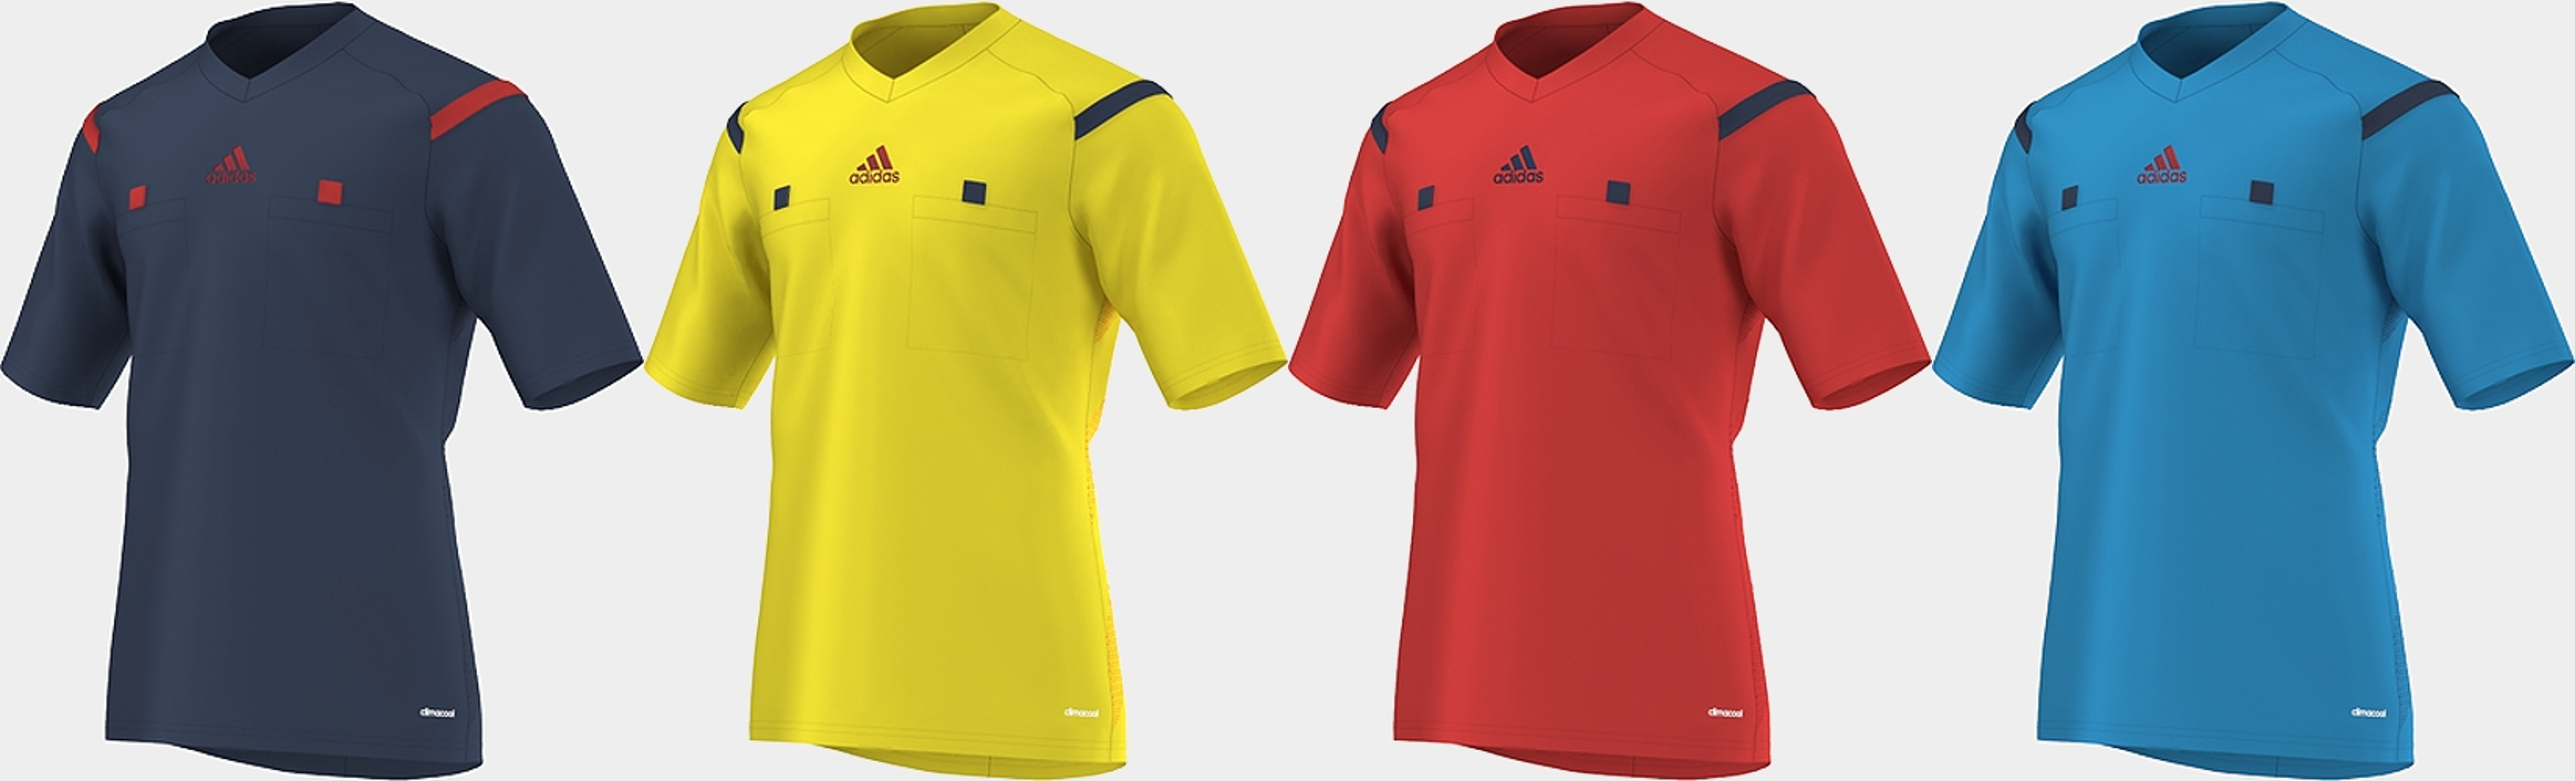 adidas World Cup 2010 Jerseys | Refereeing the Beautiful Game